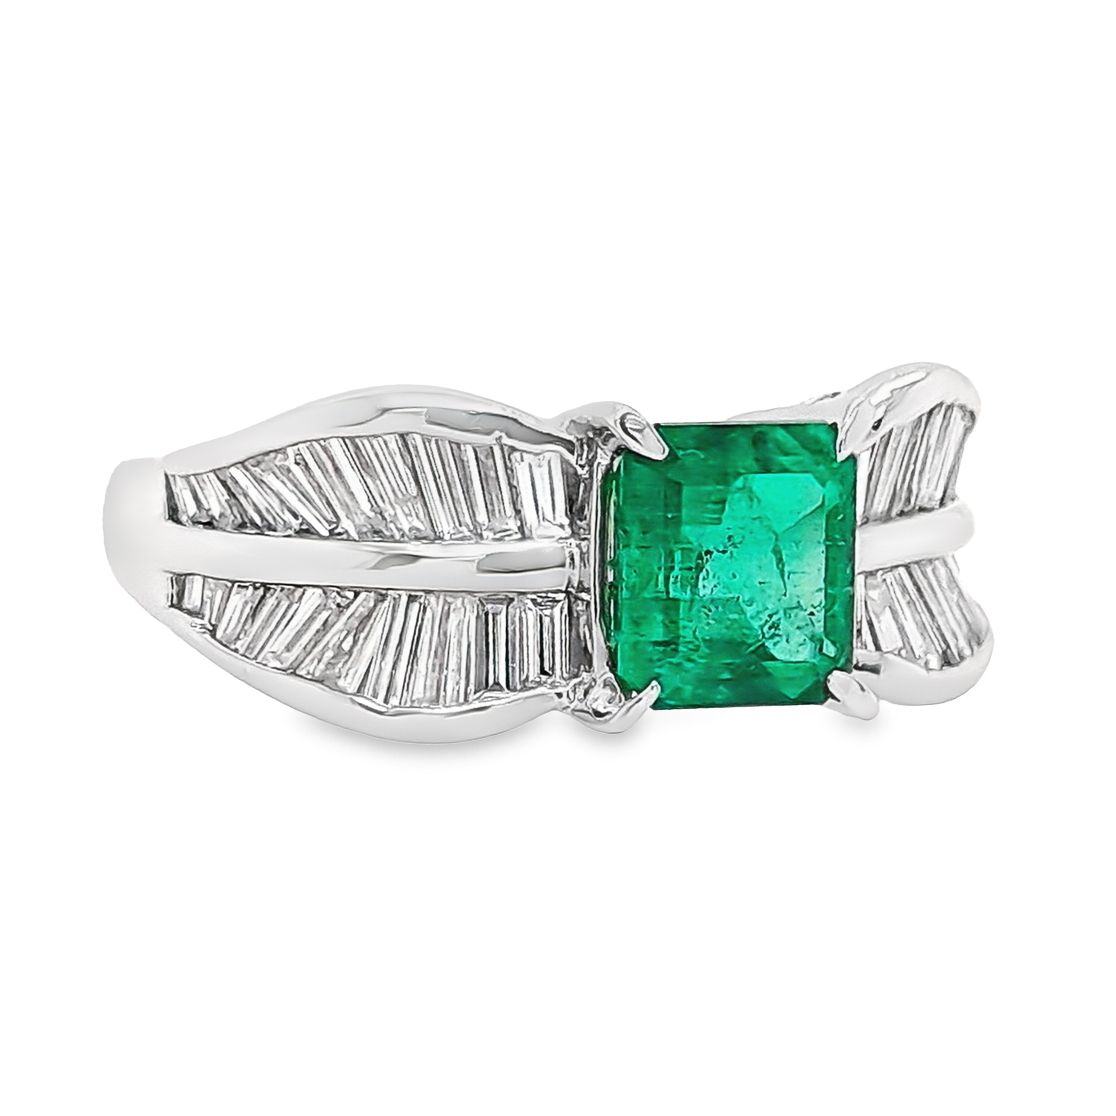 1.39ct NATURAL COLOMBIA EMERALD and 1.00ct NATURAL DIAMONDS set in Platinum Ring